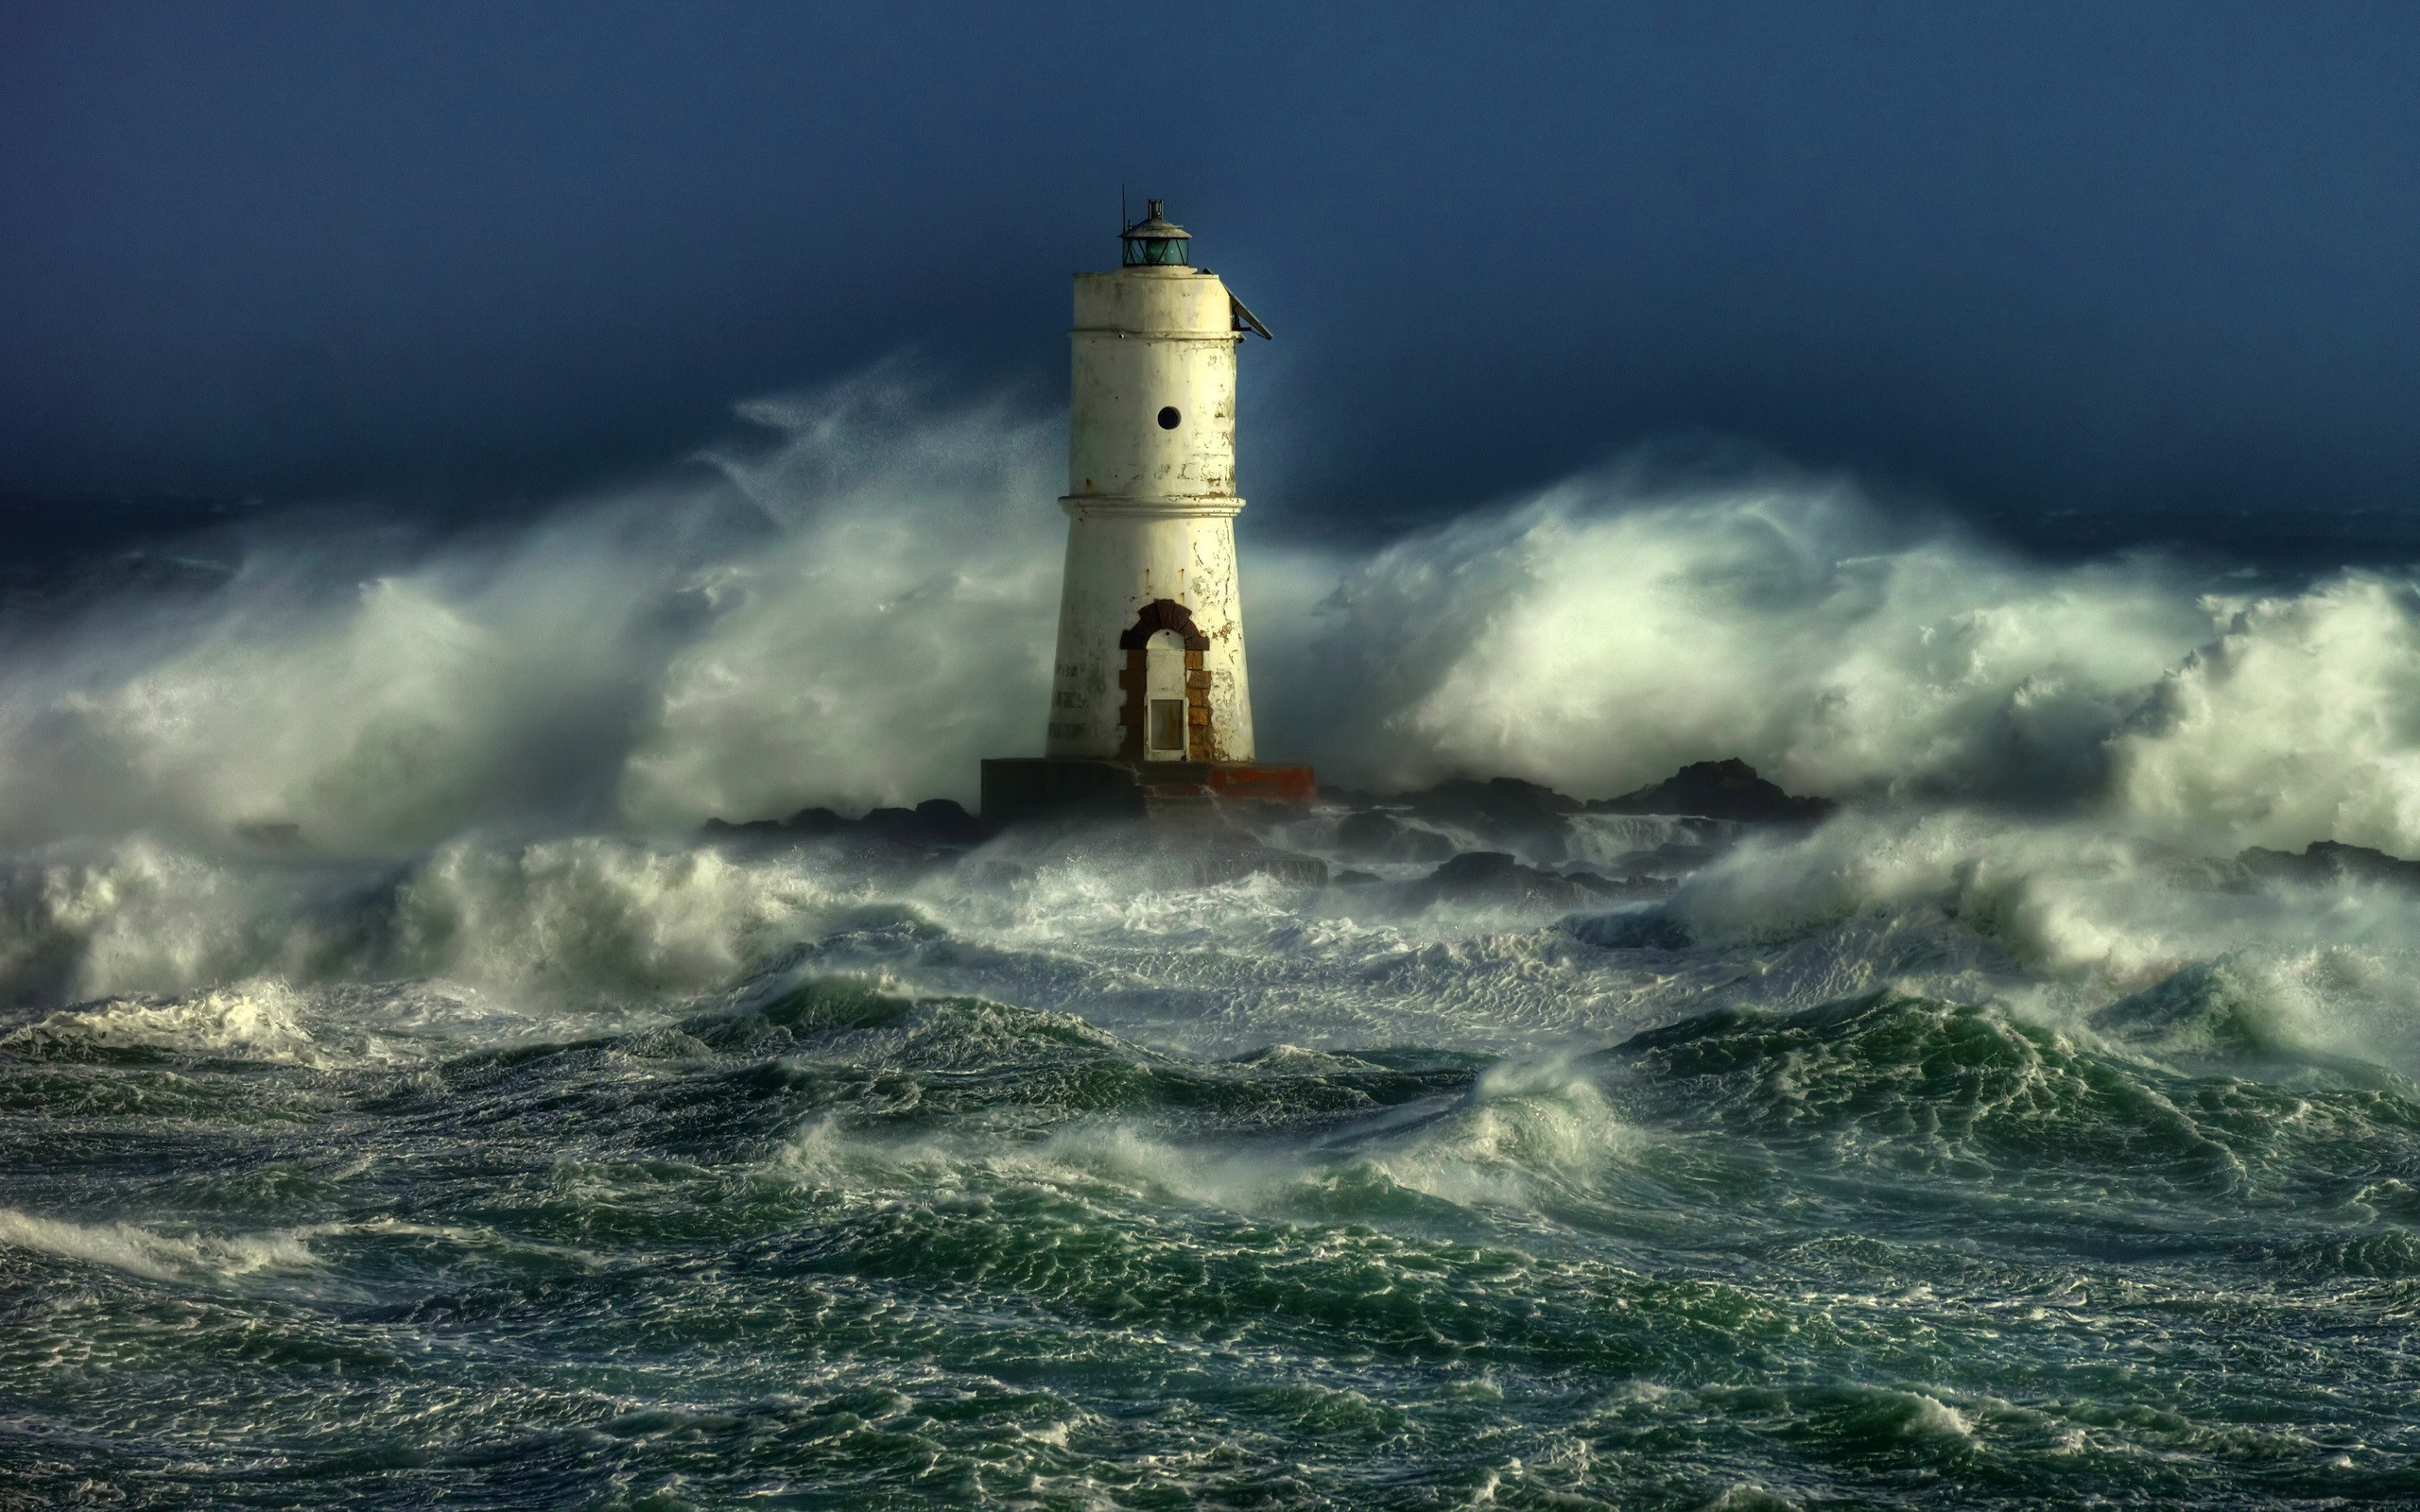 Waves crashing in the lighthouse wallpaper Lighthouses in storms Pinterest Lighthouse